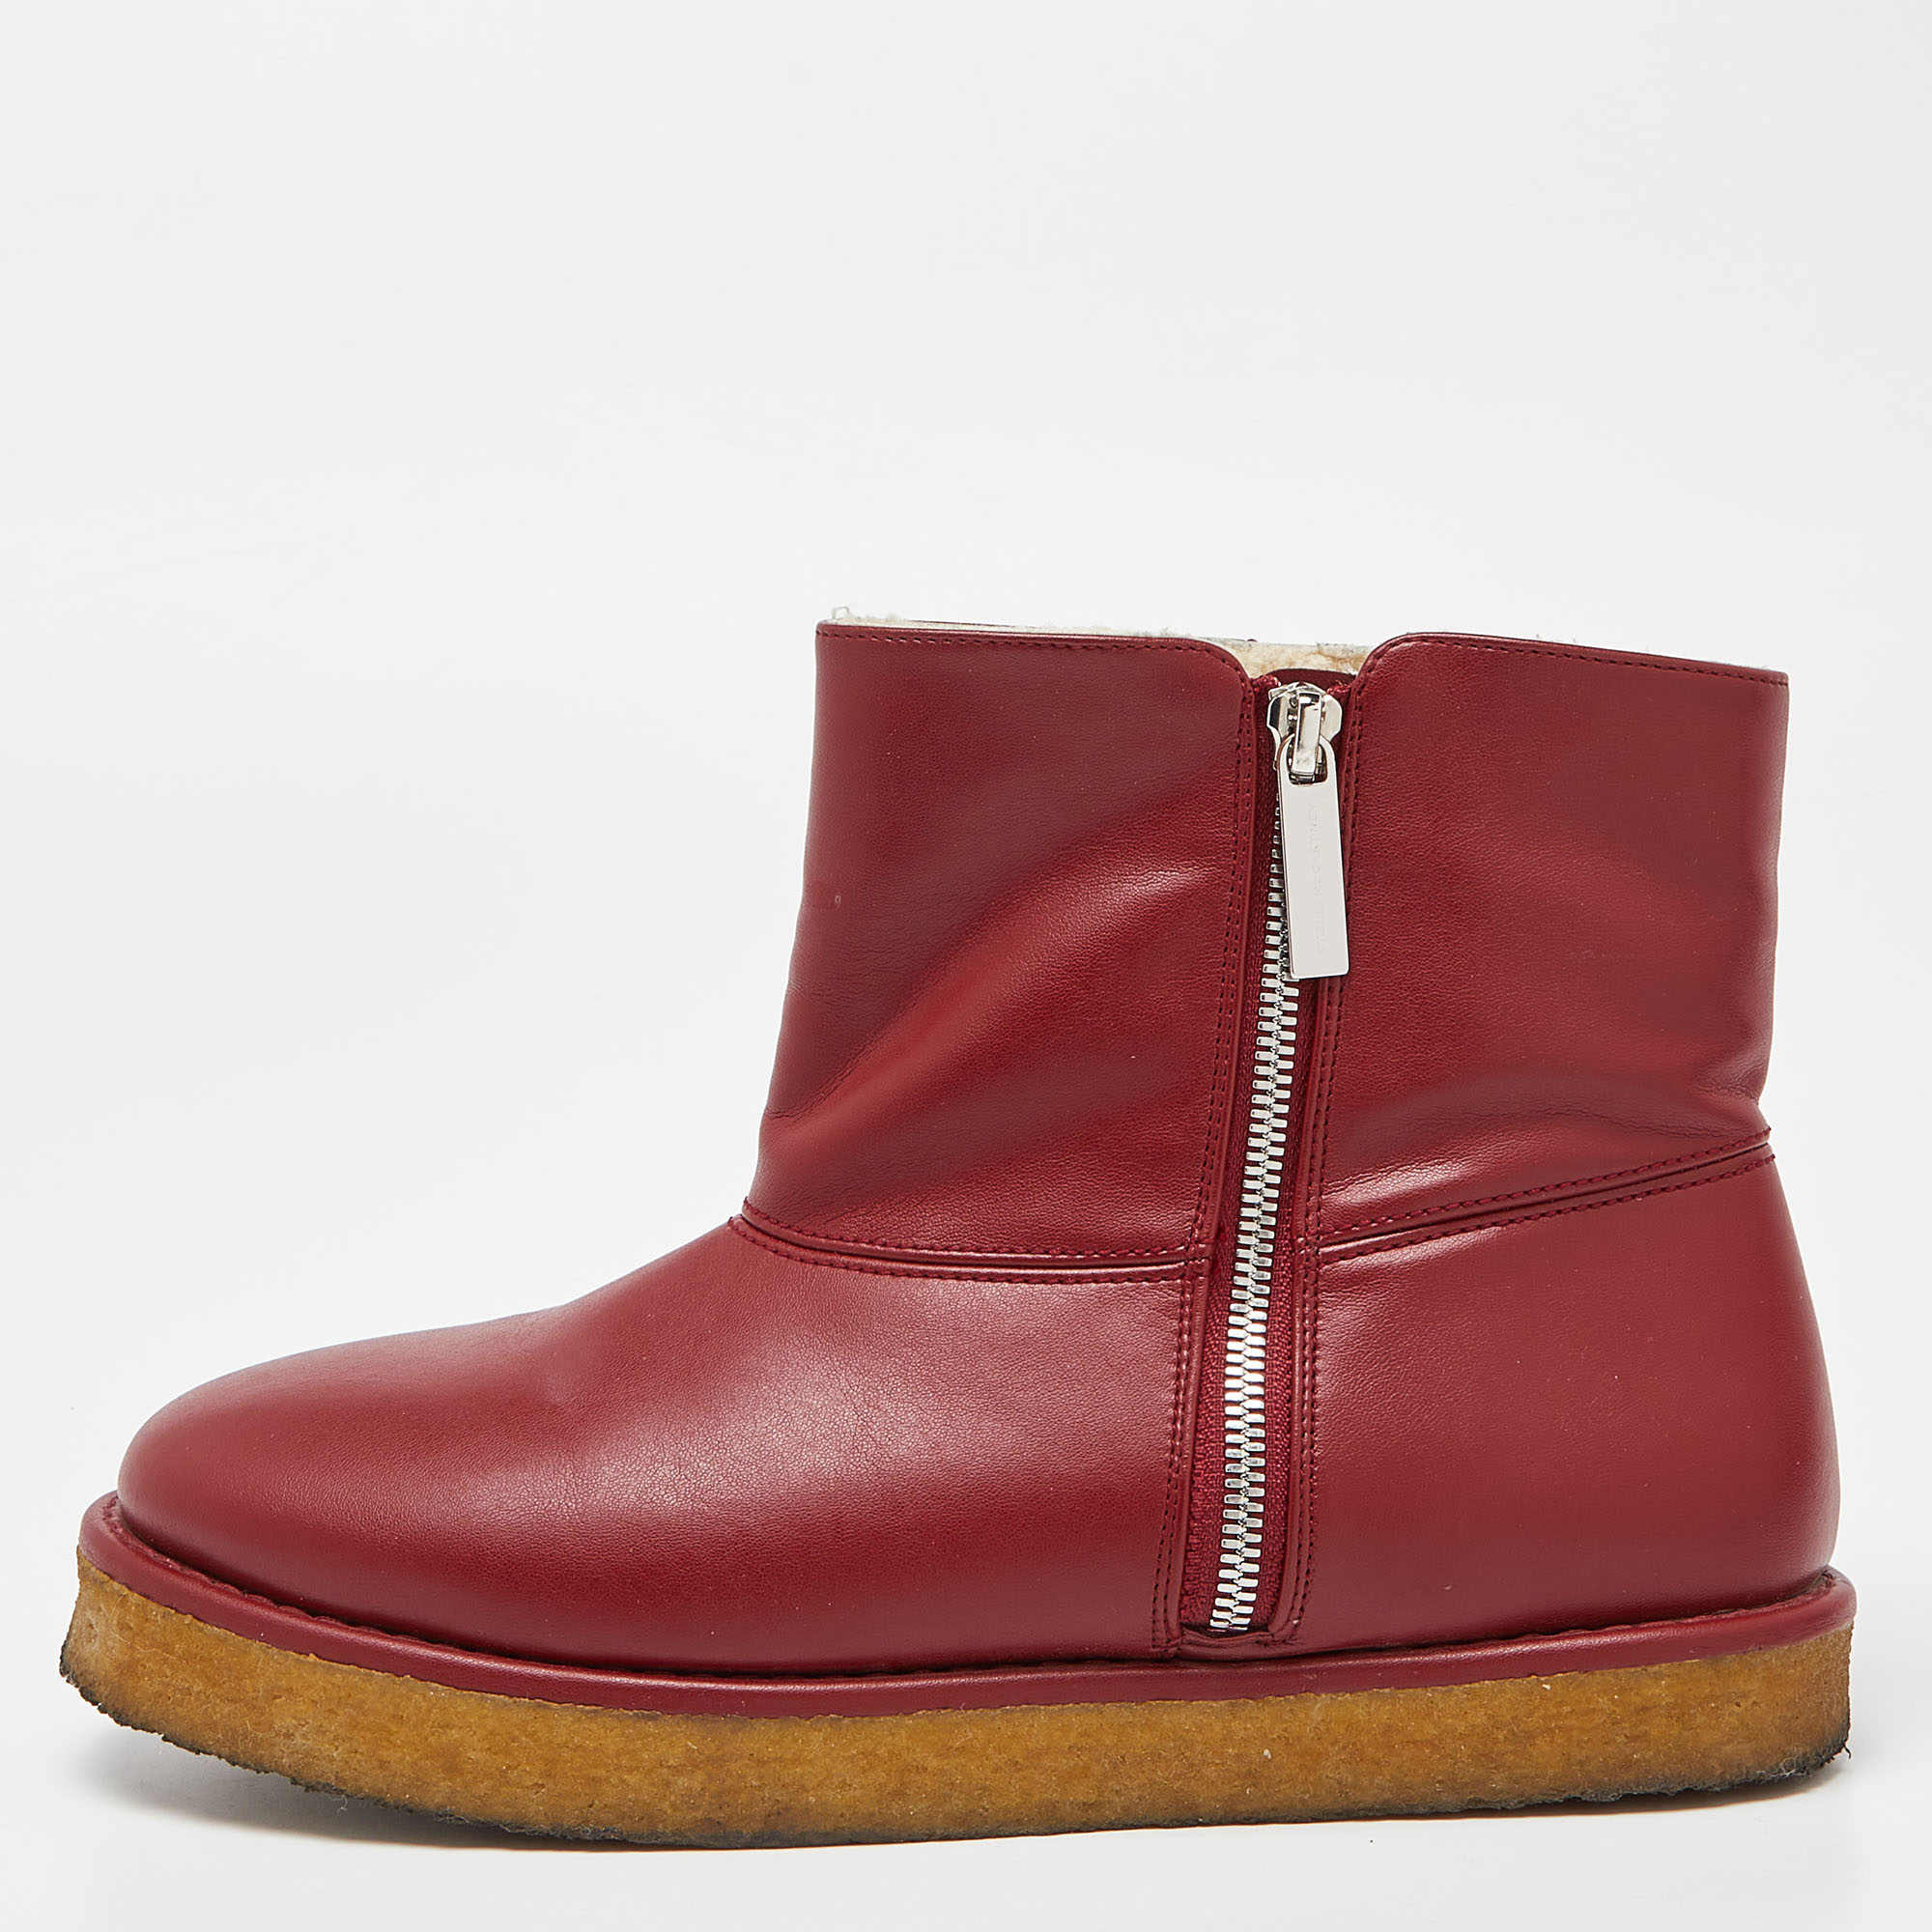 Stella McCartney Burgundy Faux Leather Ankle Boots Size 39